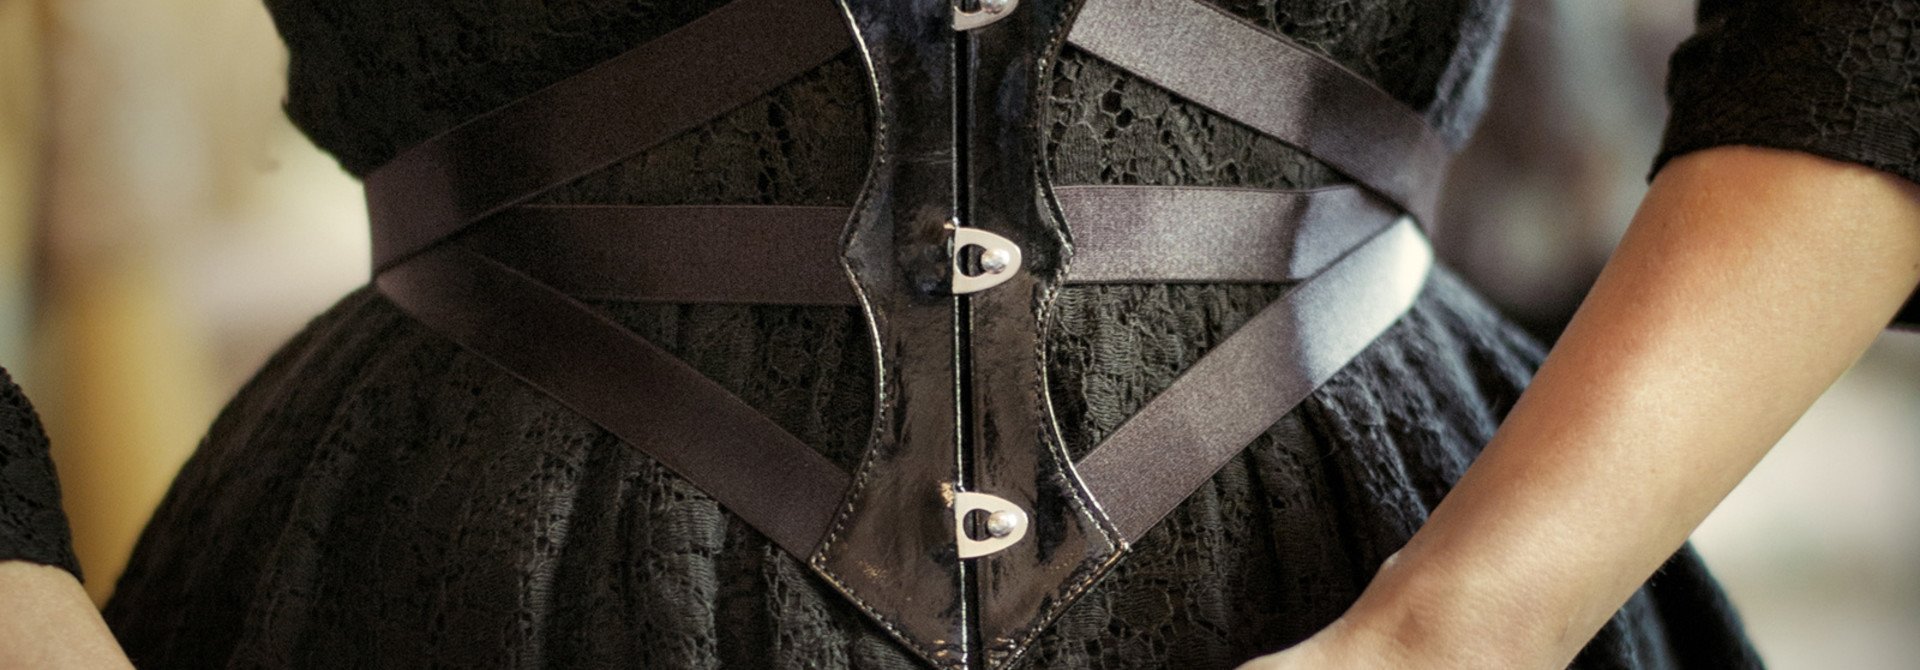 Our Dark Garden corset belts, garter belts, and specialized harnesses.